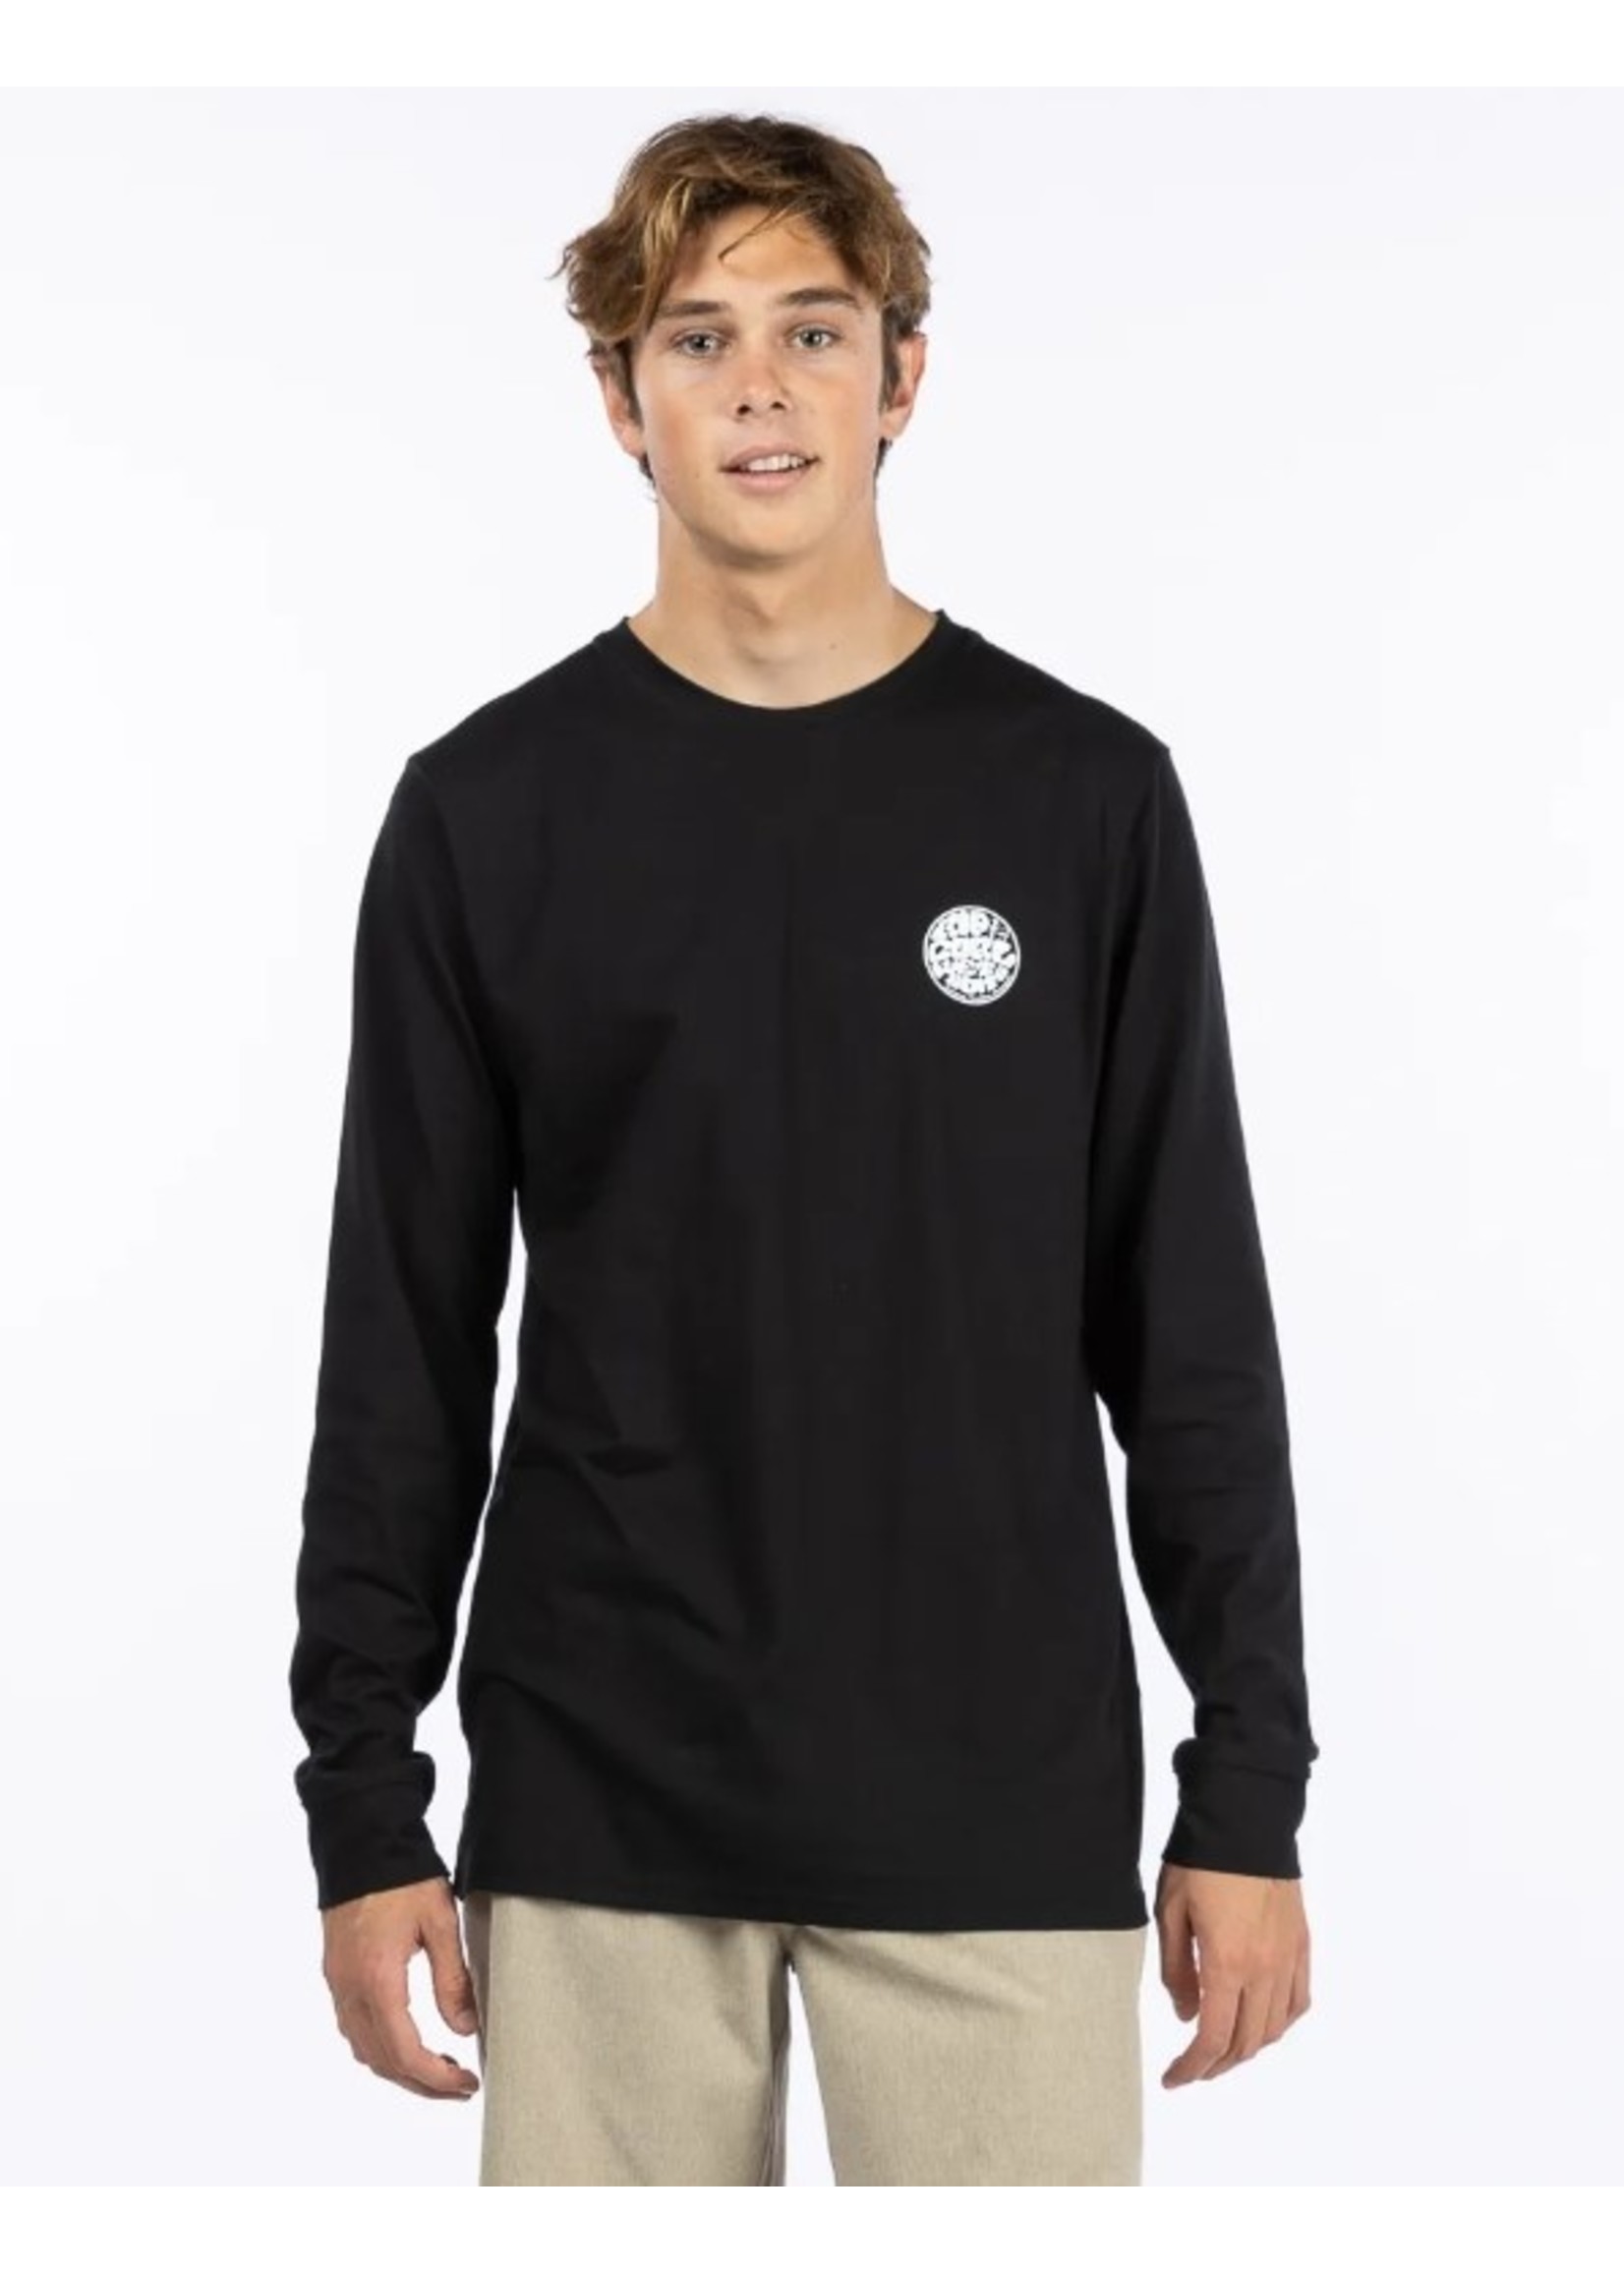 Rip Curl ICONS OF SURF LSL UV S22